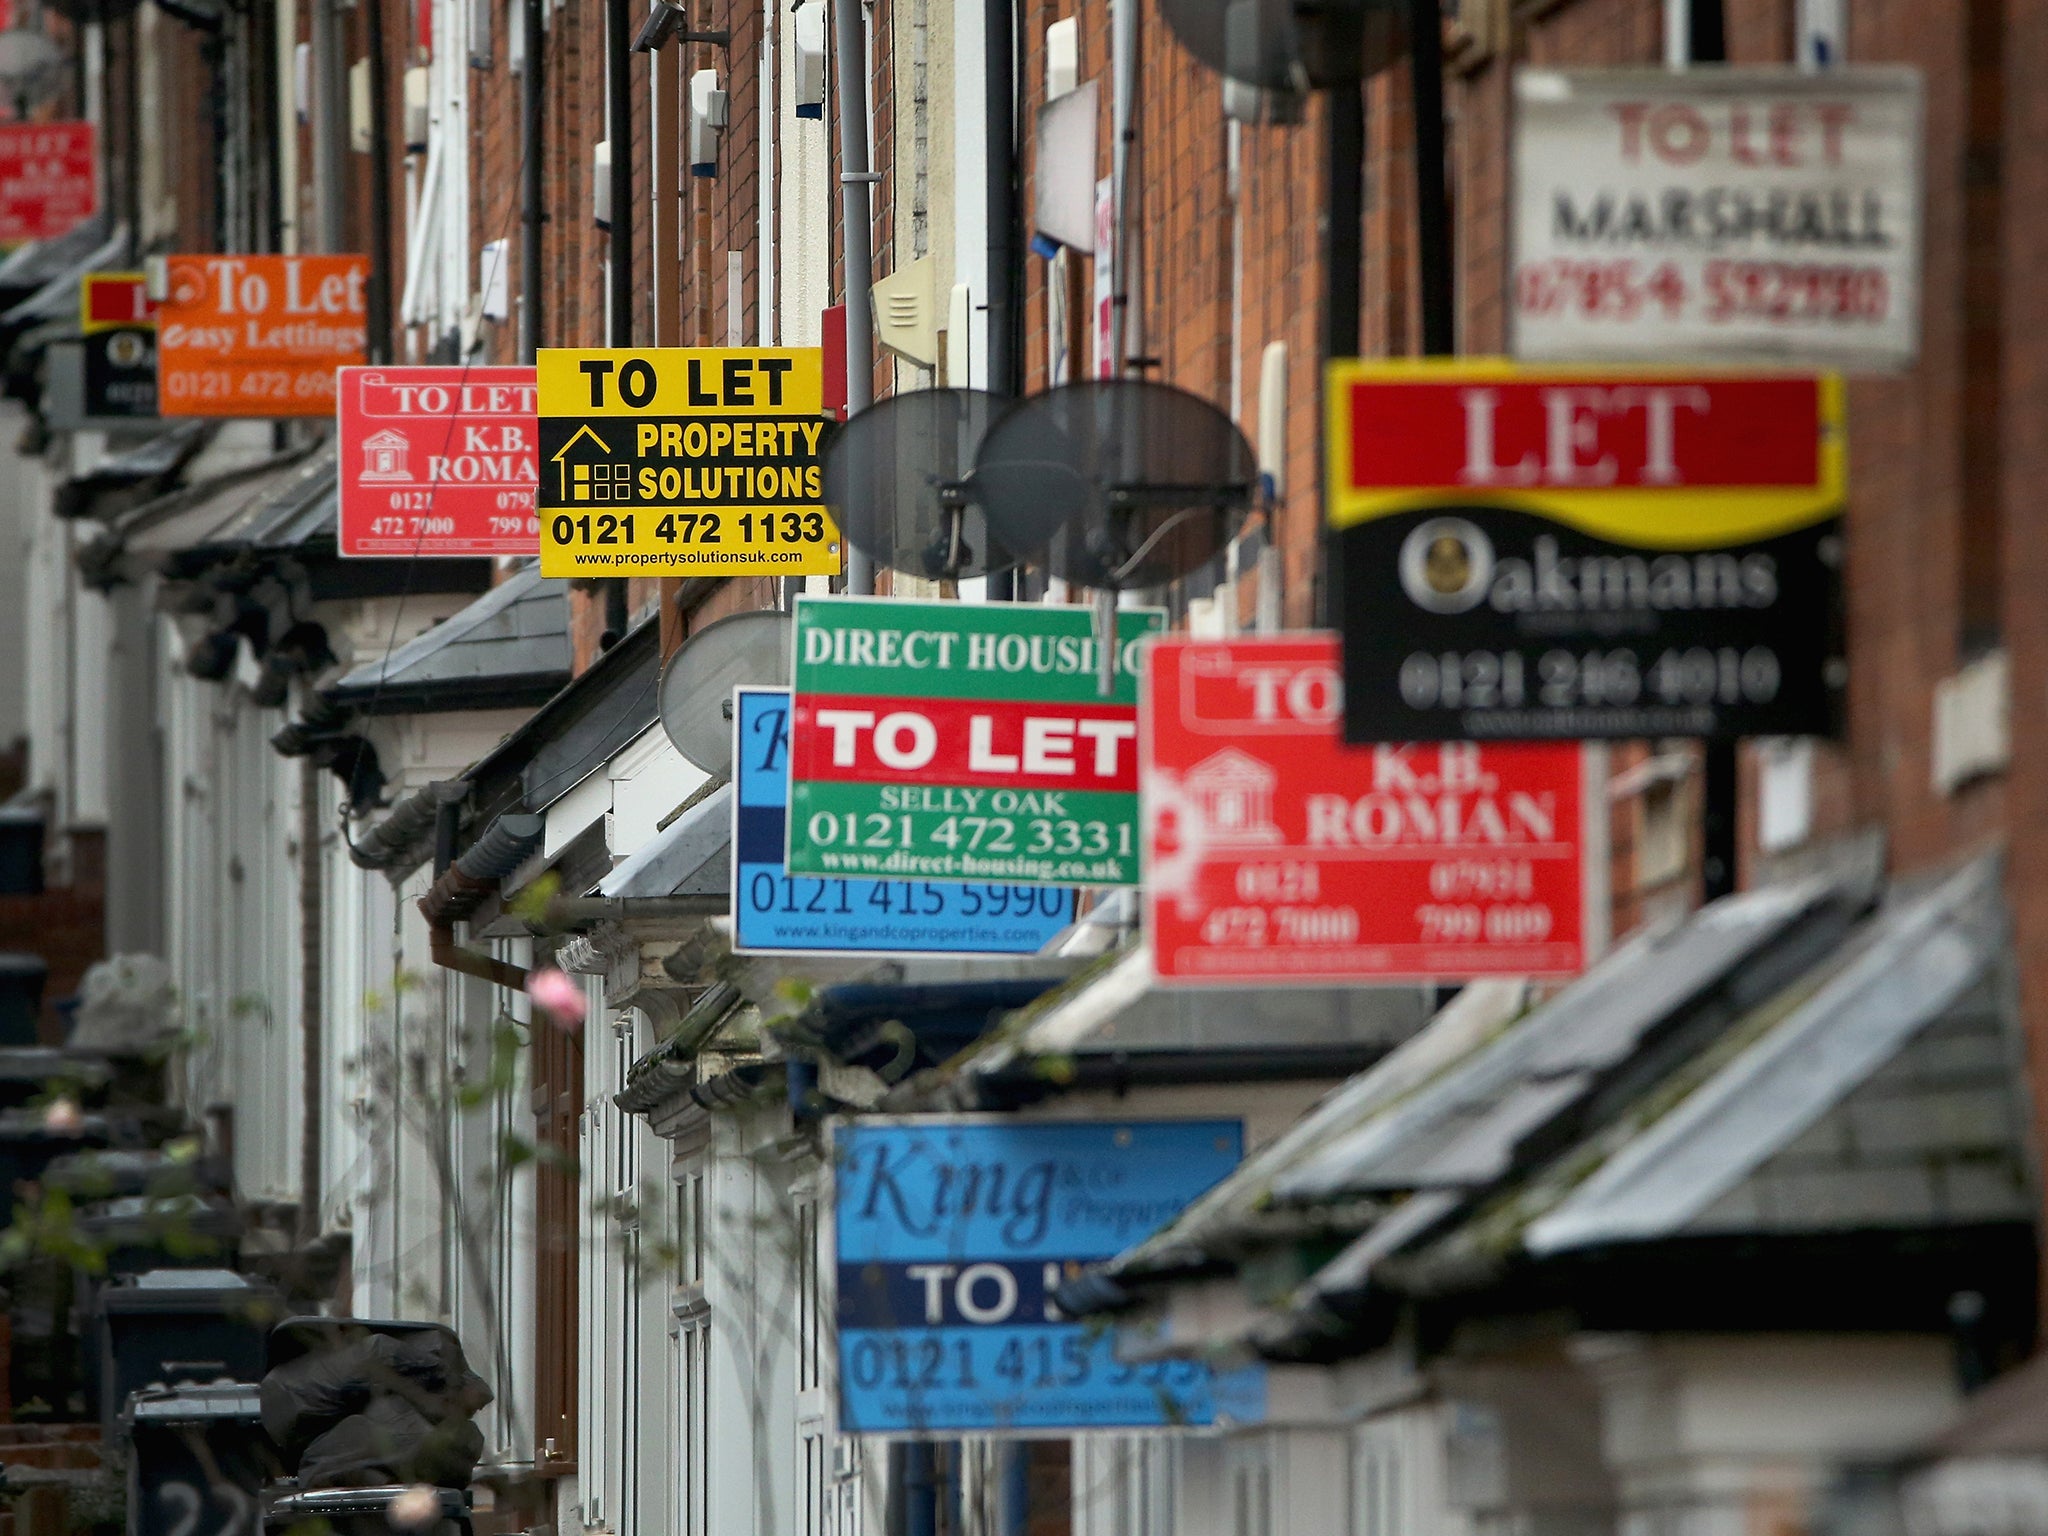 Rightmove said the pace of growth in rental prices has eased from its peak of 12% two years ago